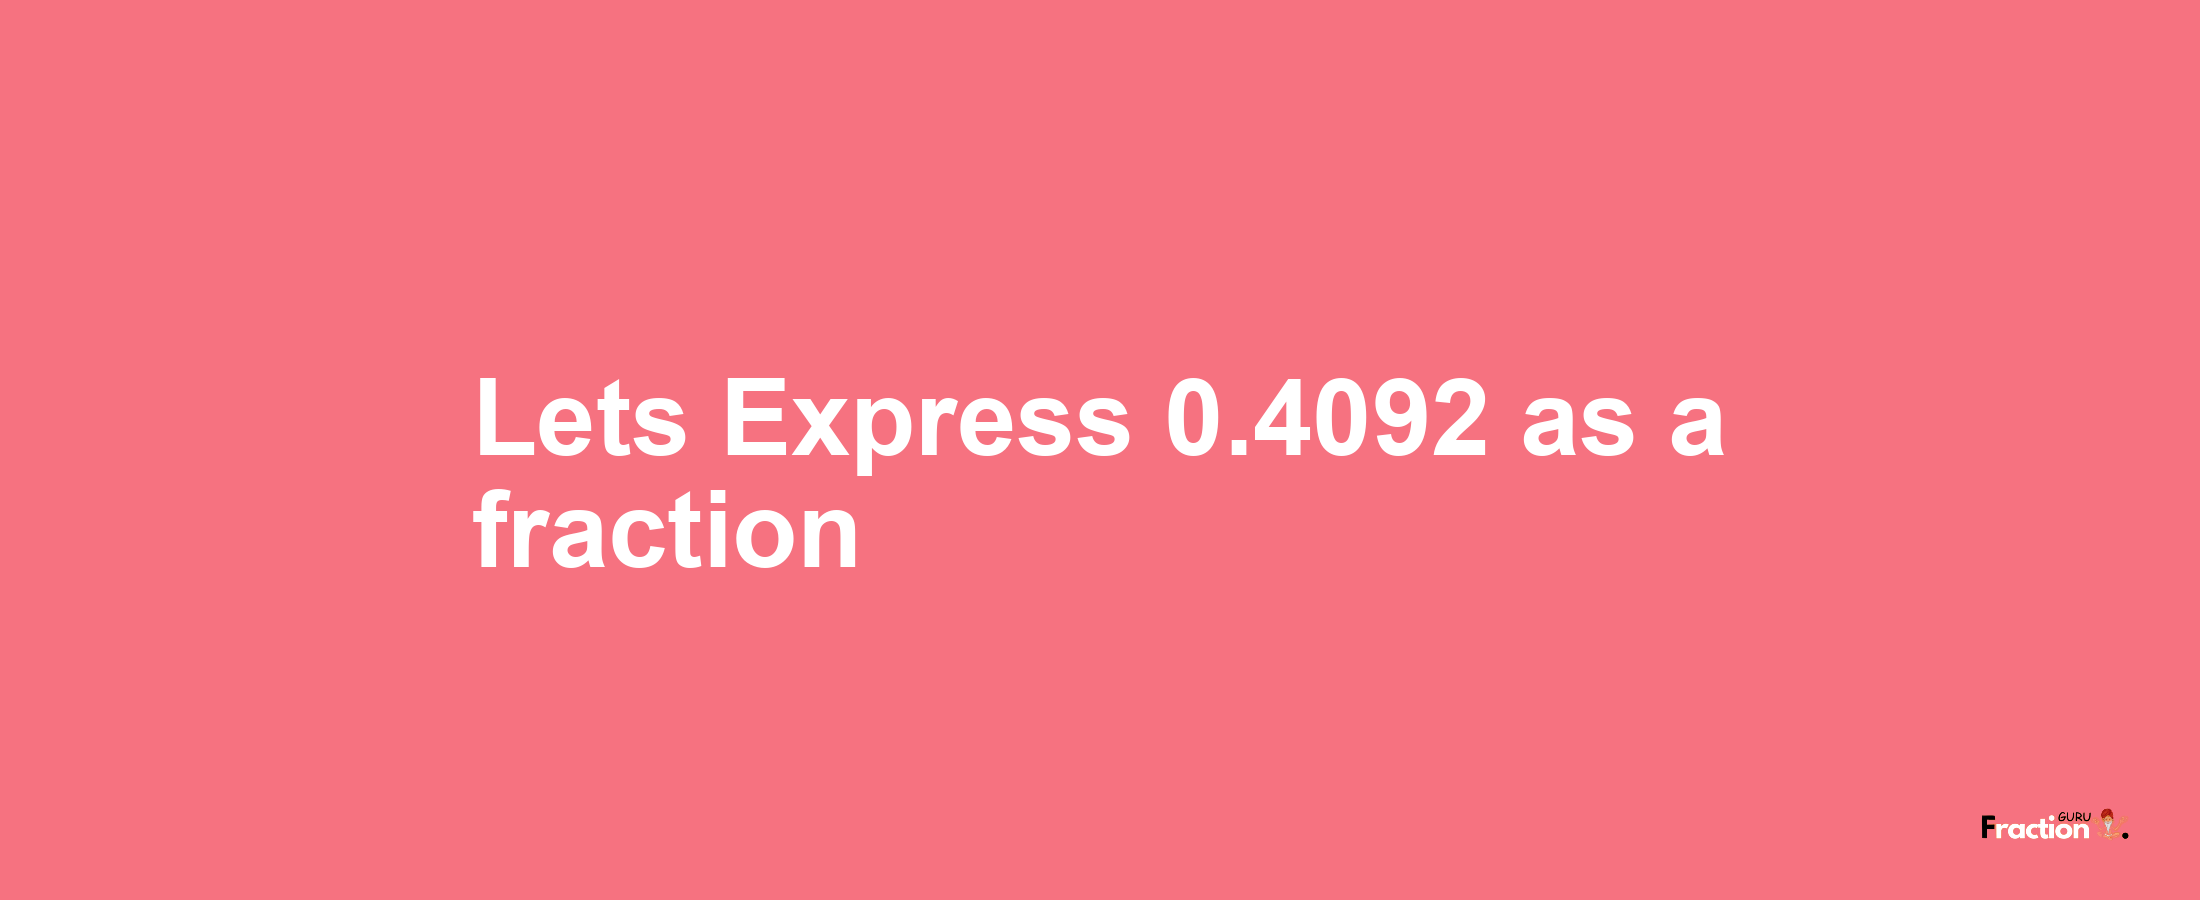 Lets Express 0.4092 as afraction